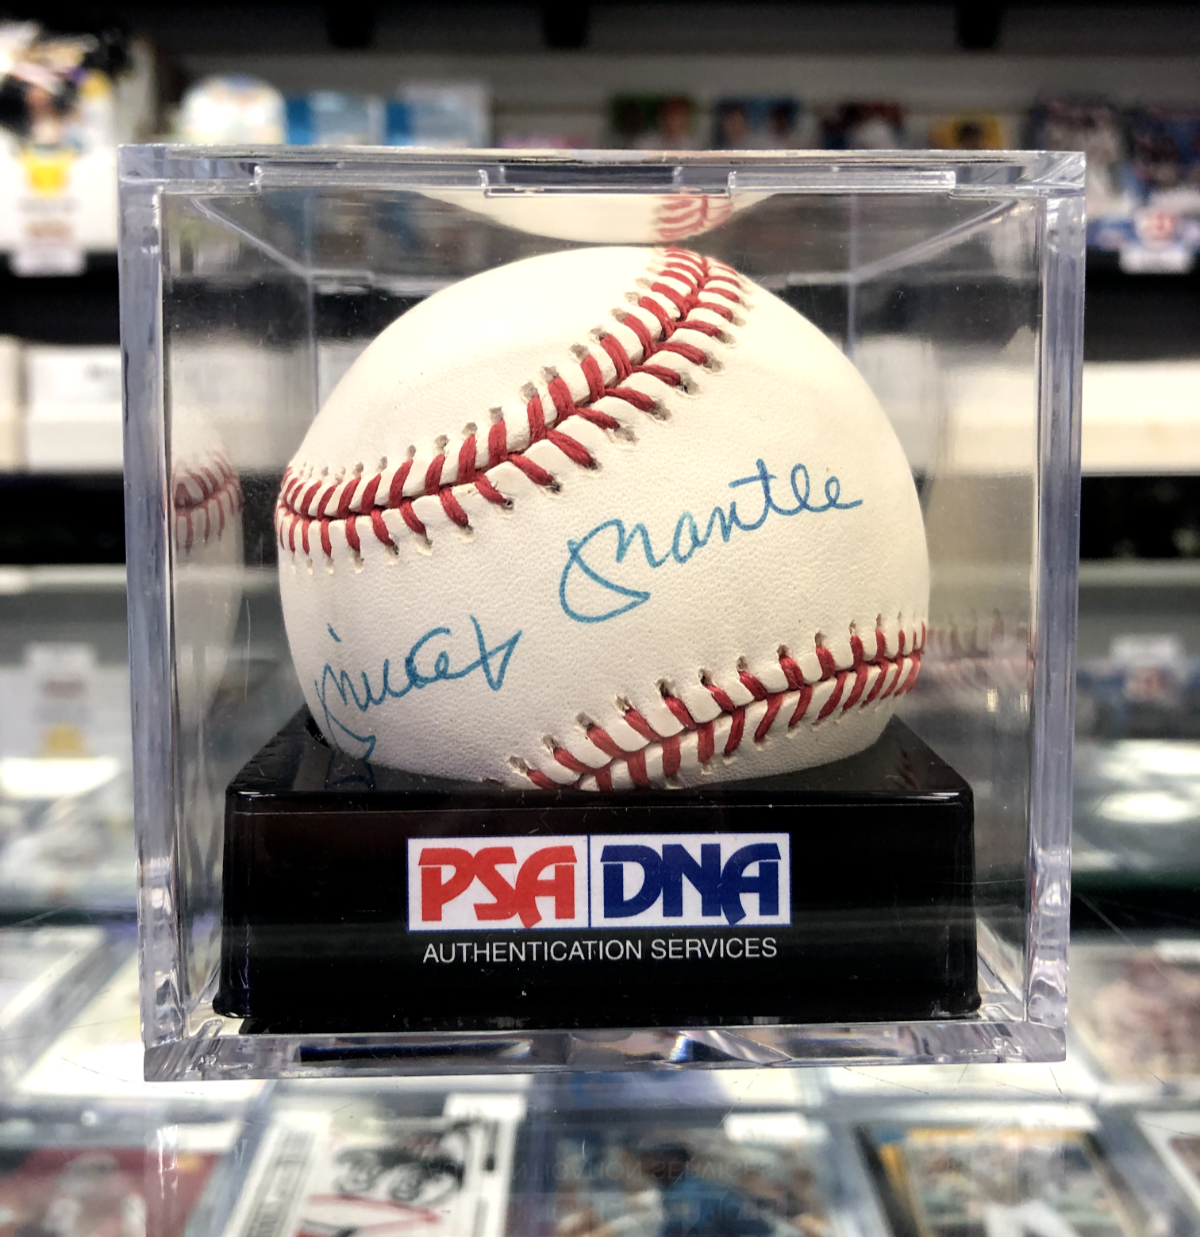 Mickey Mantle Autograph: How Much Is It Worth?